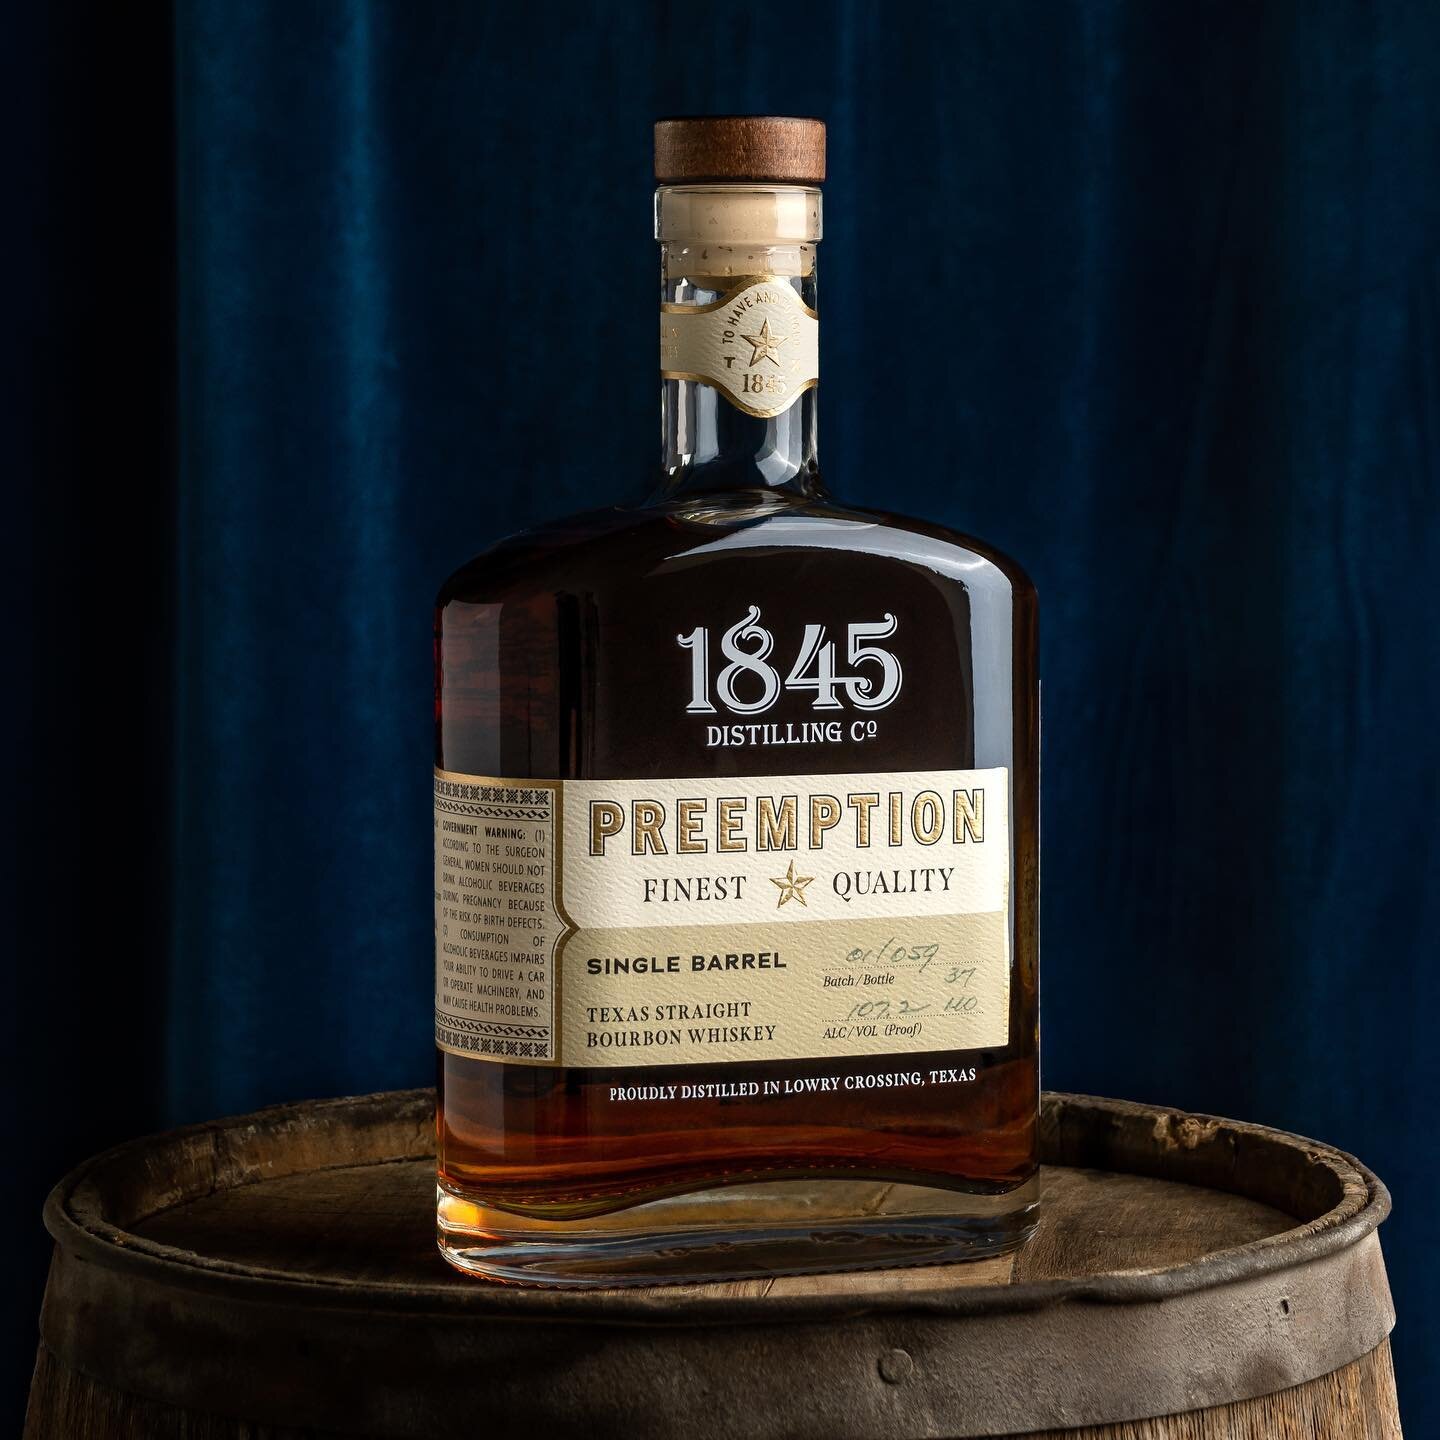 We have been working with @1845distilling for a year now and proud to share one of their bourbons that will soon be available.

🏷: @bluelabelpackaging 
🥃: Chattanooga Labeling Systems
📸:@remoremodesign

#1845distillingco #republicoftexas #texasbou